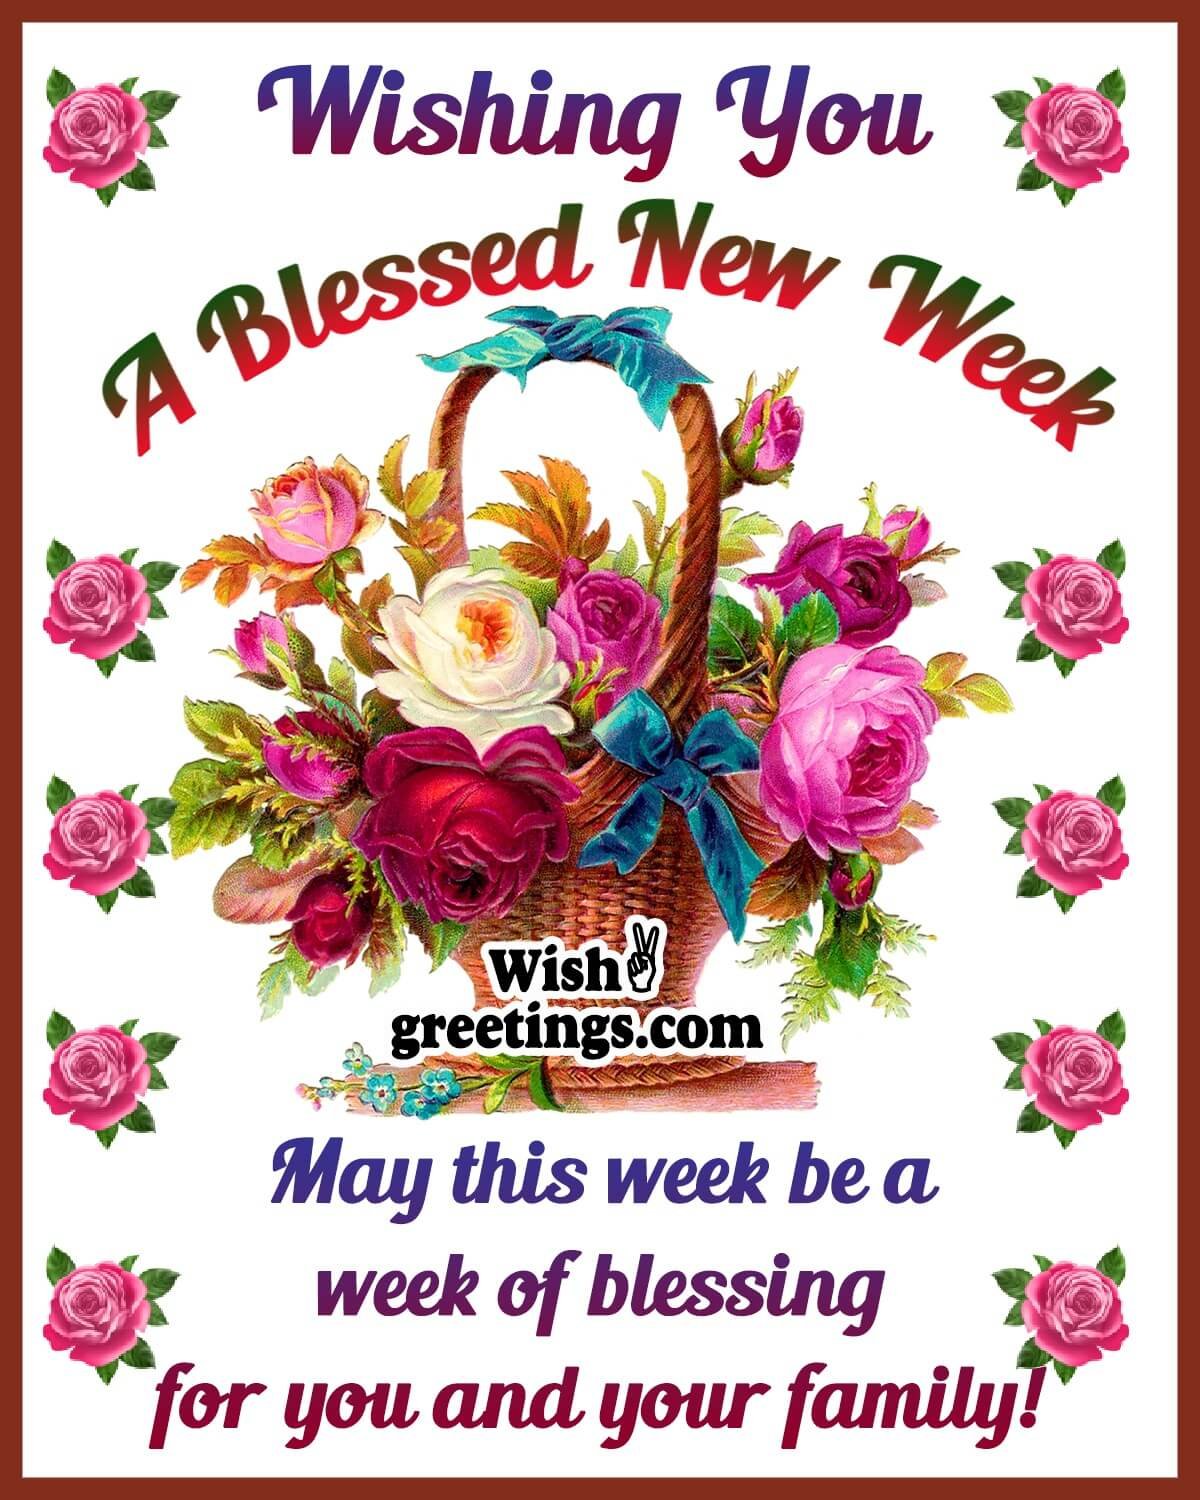 Wishing Blessed New Week